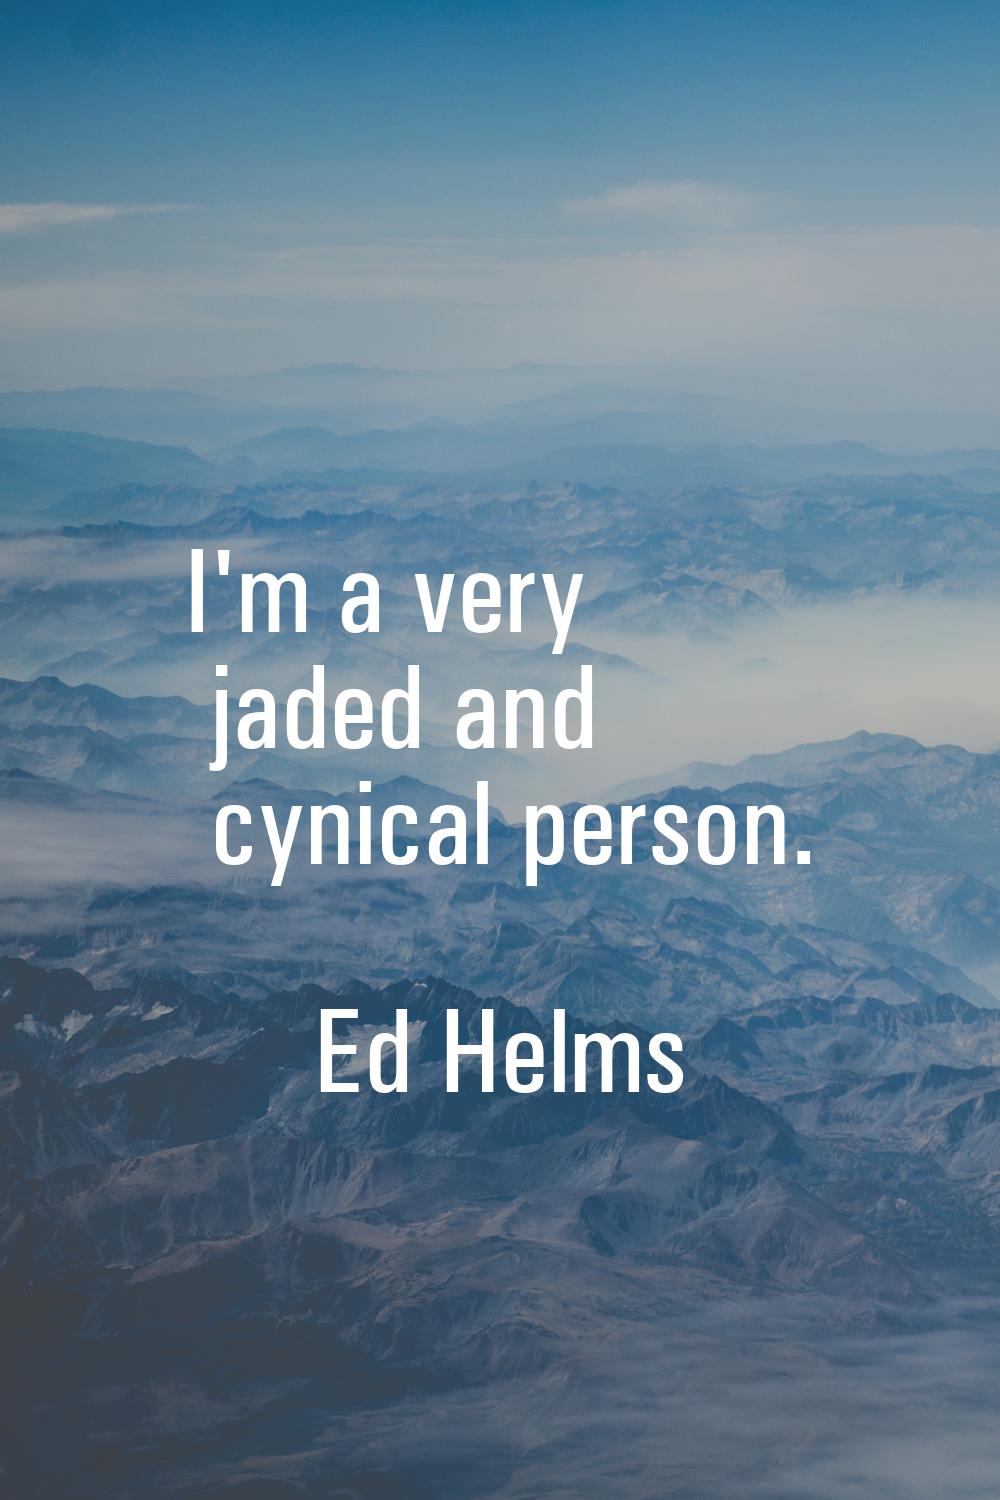 I'm a very jaded and cynical person.